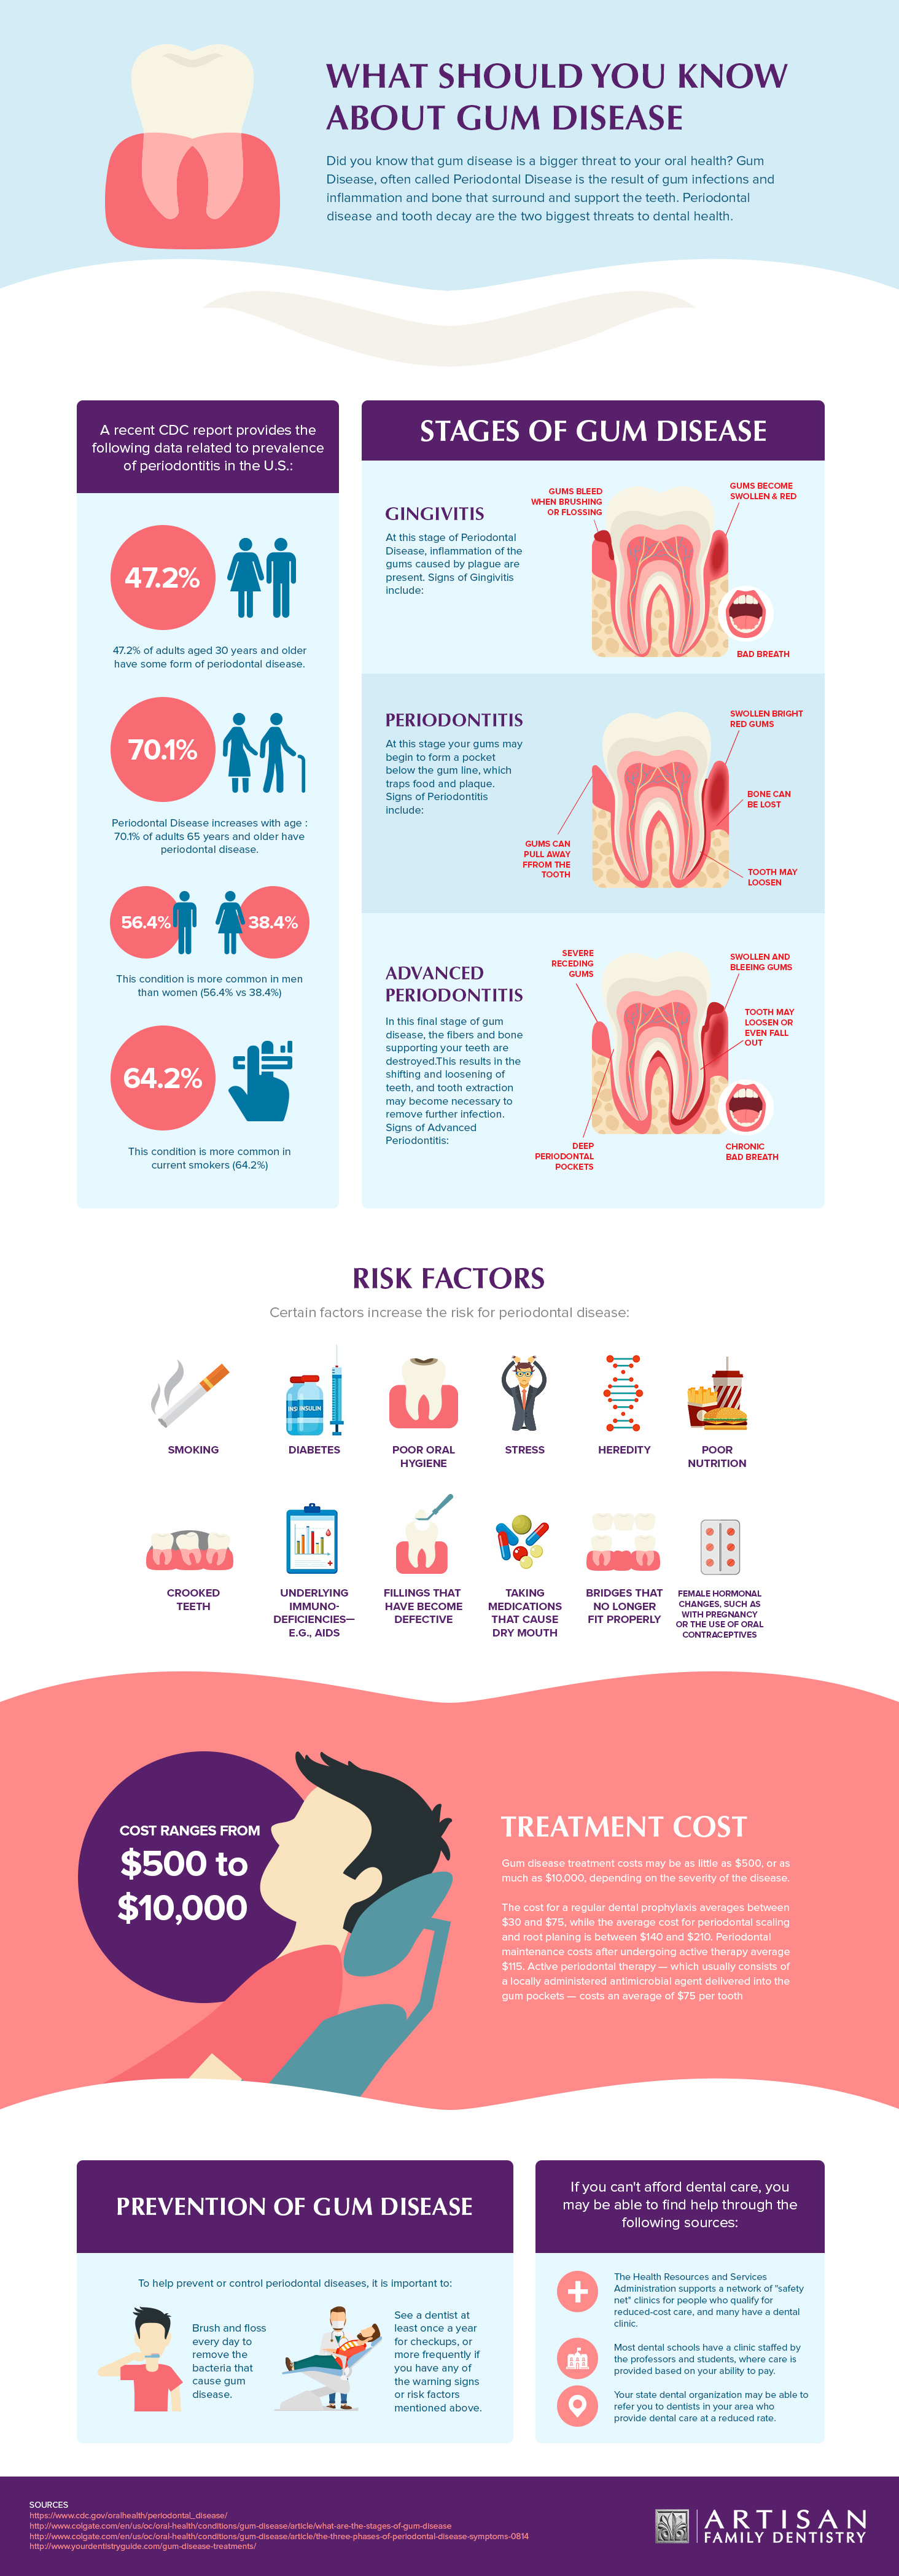 Know about Gum Disease